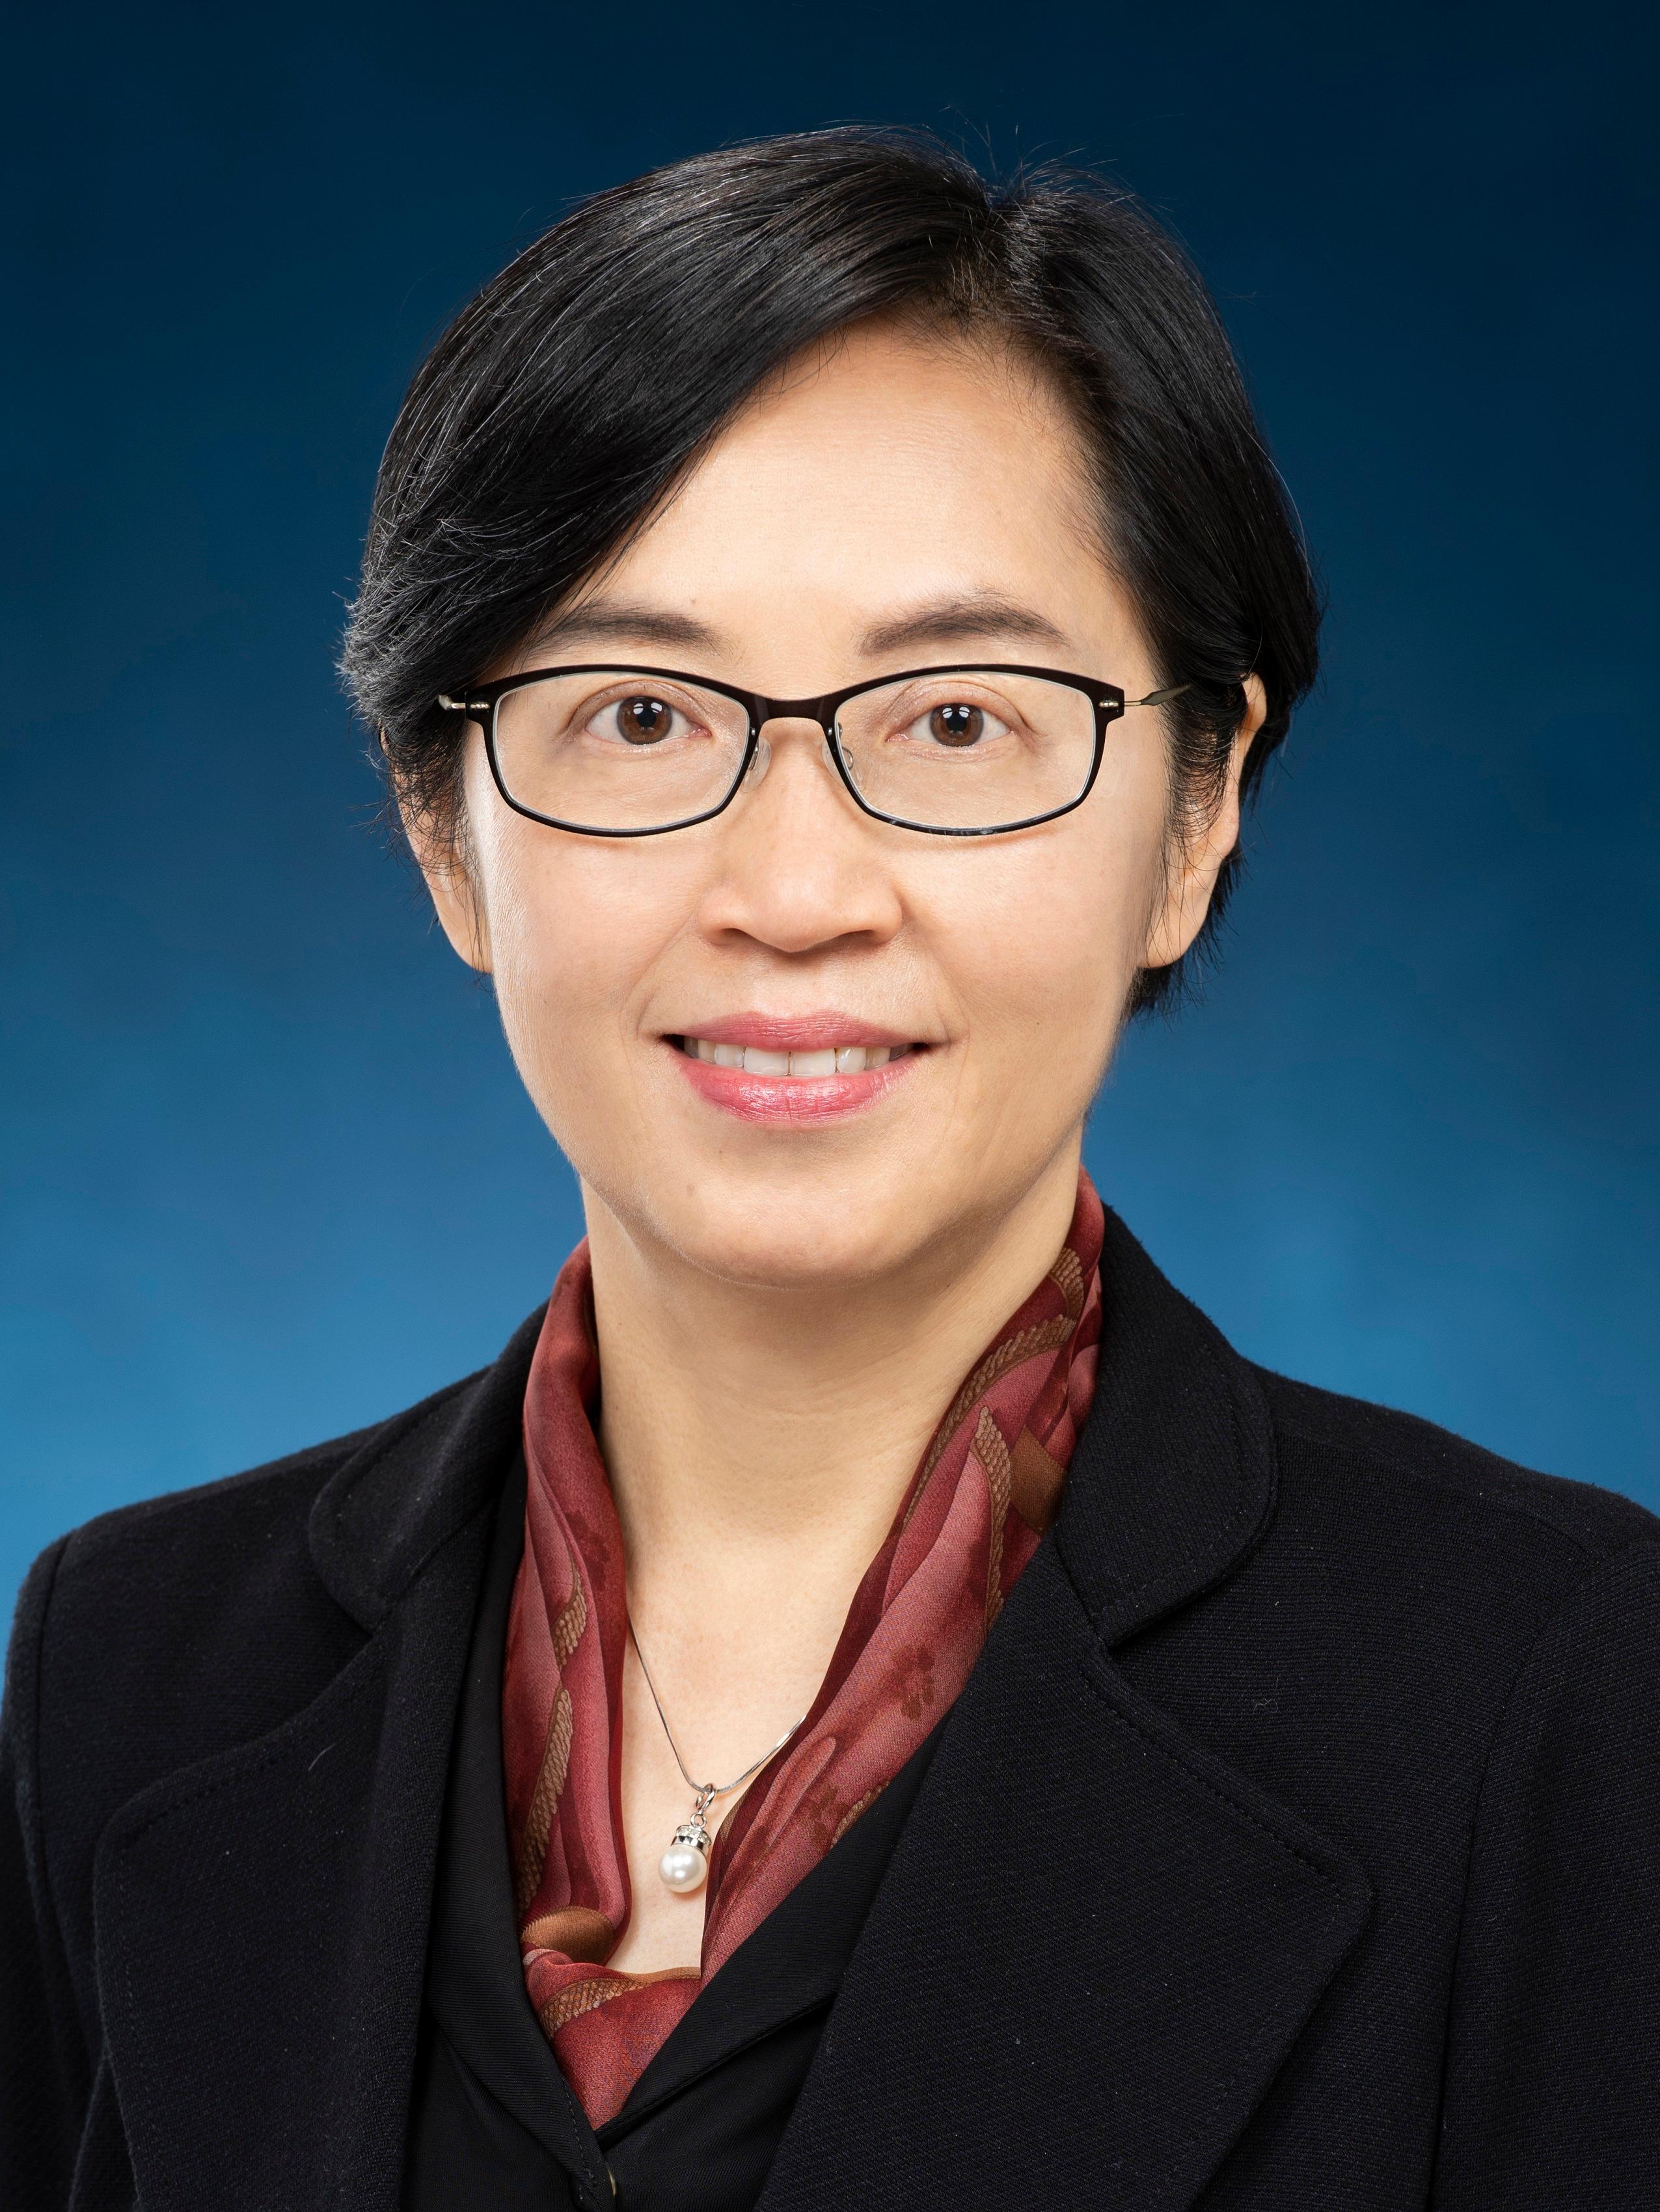 The Government announced today (March 31) that the Chief Executive has appointed Ms Maisie Cheng Mei-sze as the Chairman of the Public Service Commission for a term of three years from May 1, 2023, to April 30, 2026.